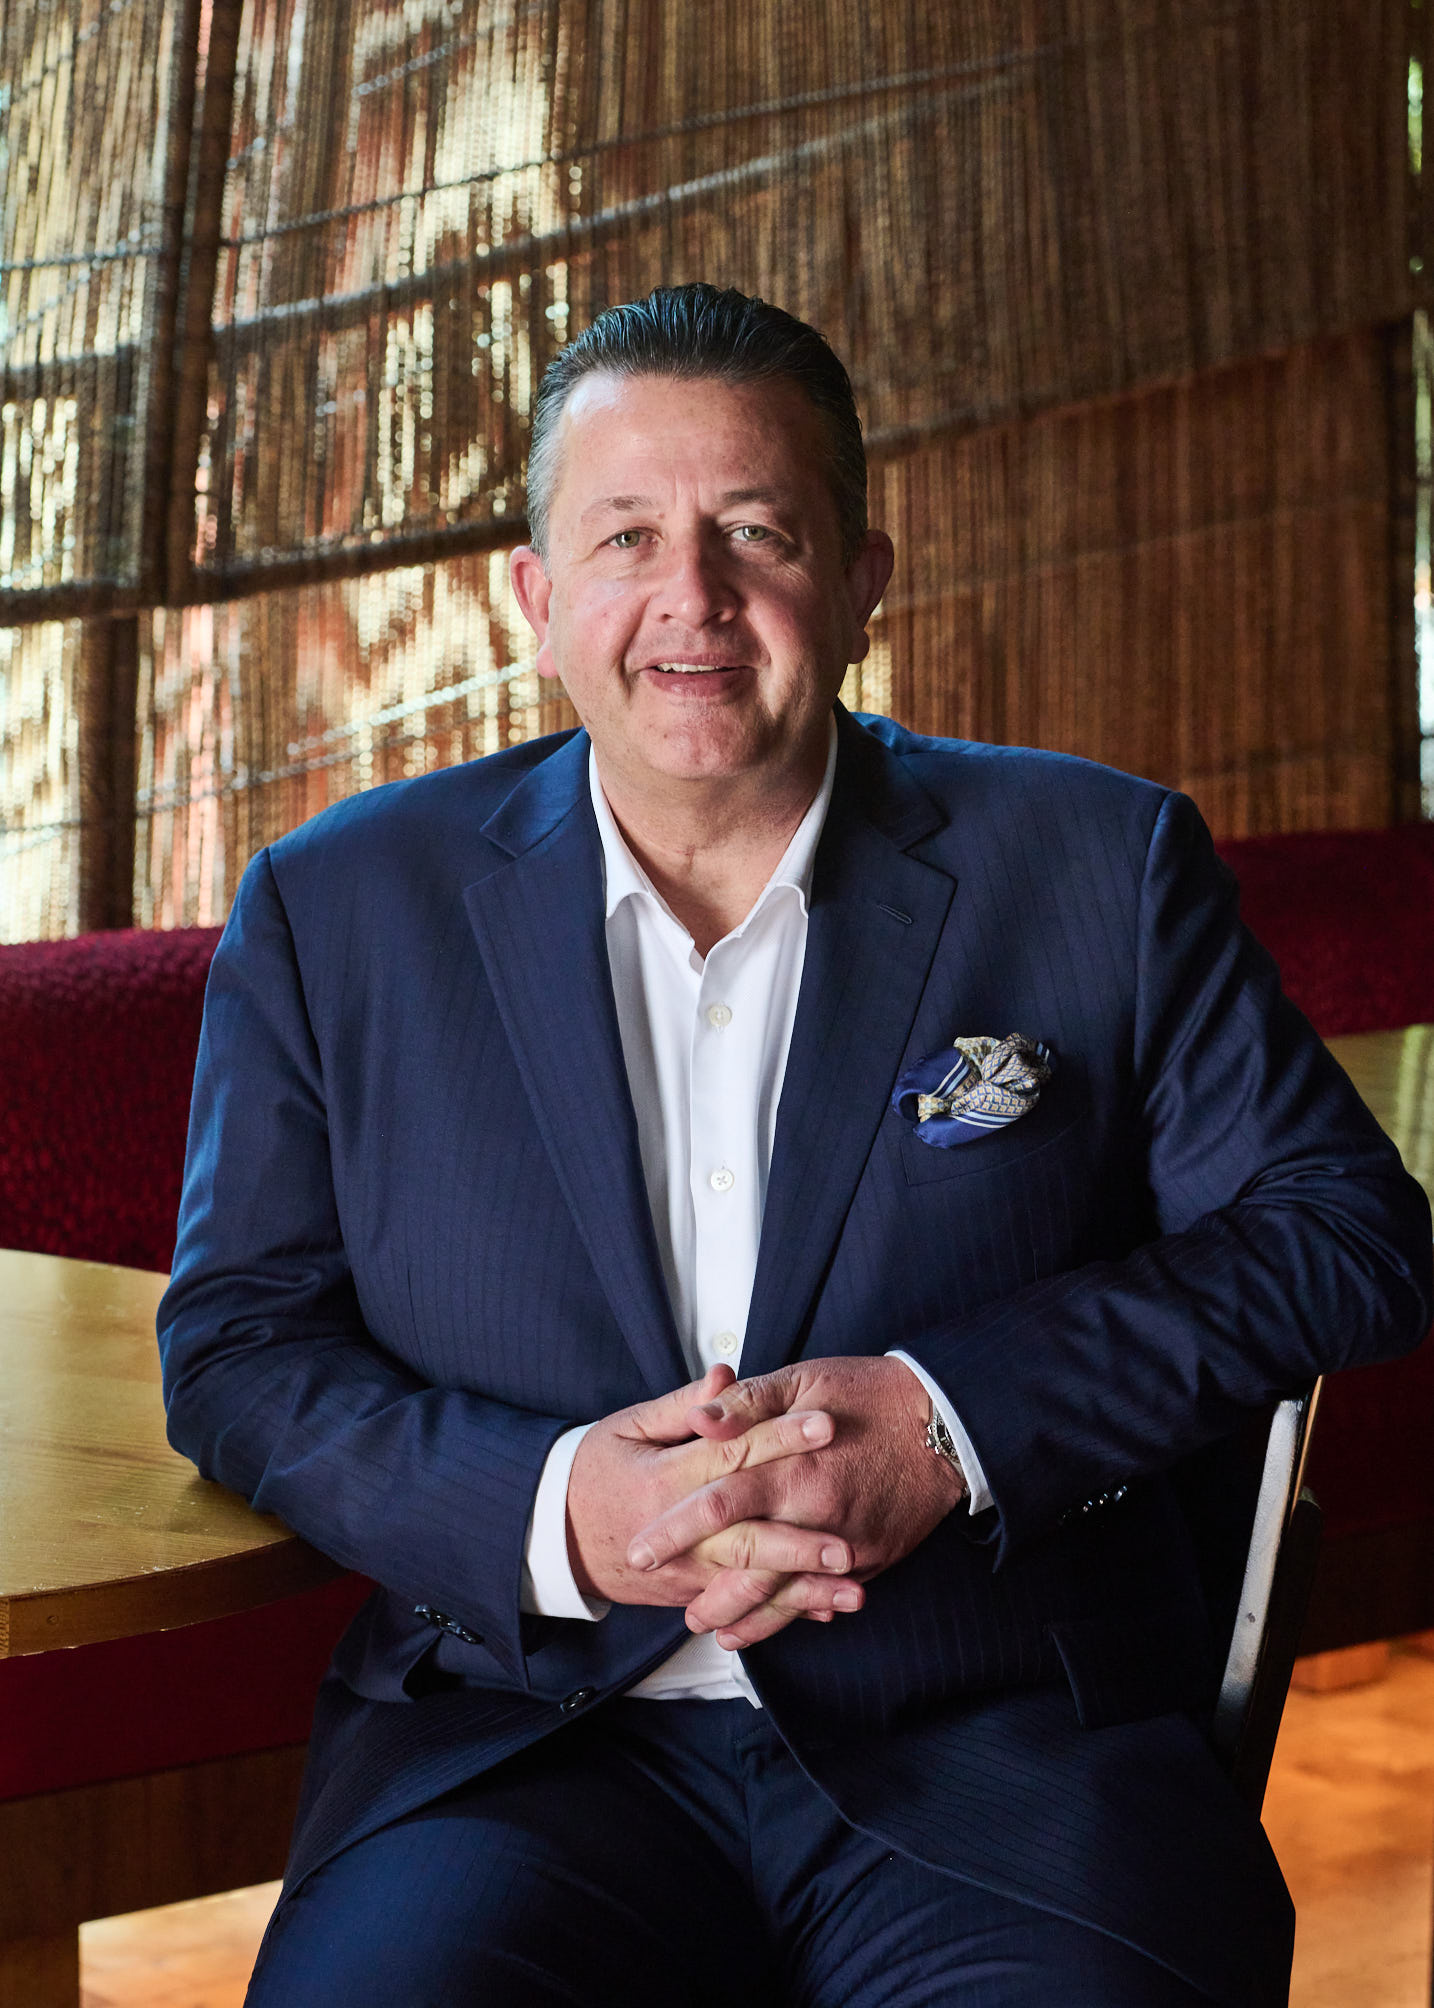 Atlantis, The Palm announces the appointment of Kym Barter as the new General Manager and Senior Vice President, Operations at Atlantis, The Palm Dubai. With over three decades of experience in luxury hospitality and food and beverage, Barter's appointment follows an impressive two-year tenure as Vice President, Food & Beverage across the Atlantis destination.